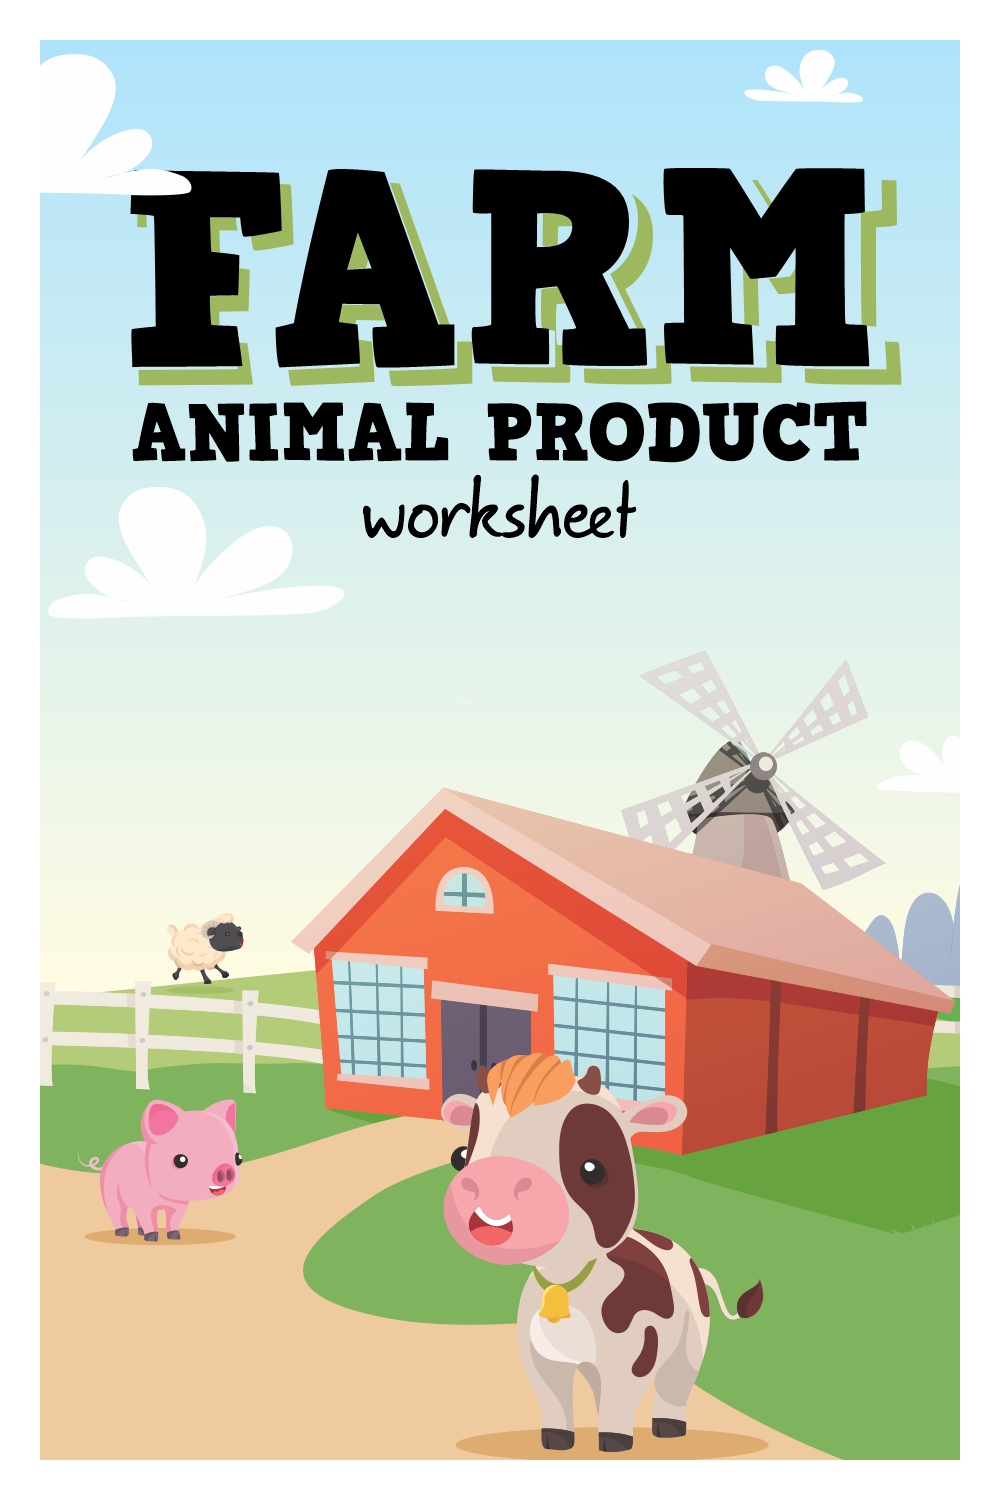 9 Images of Farm Animal Products Worksheet